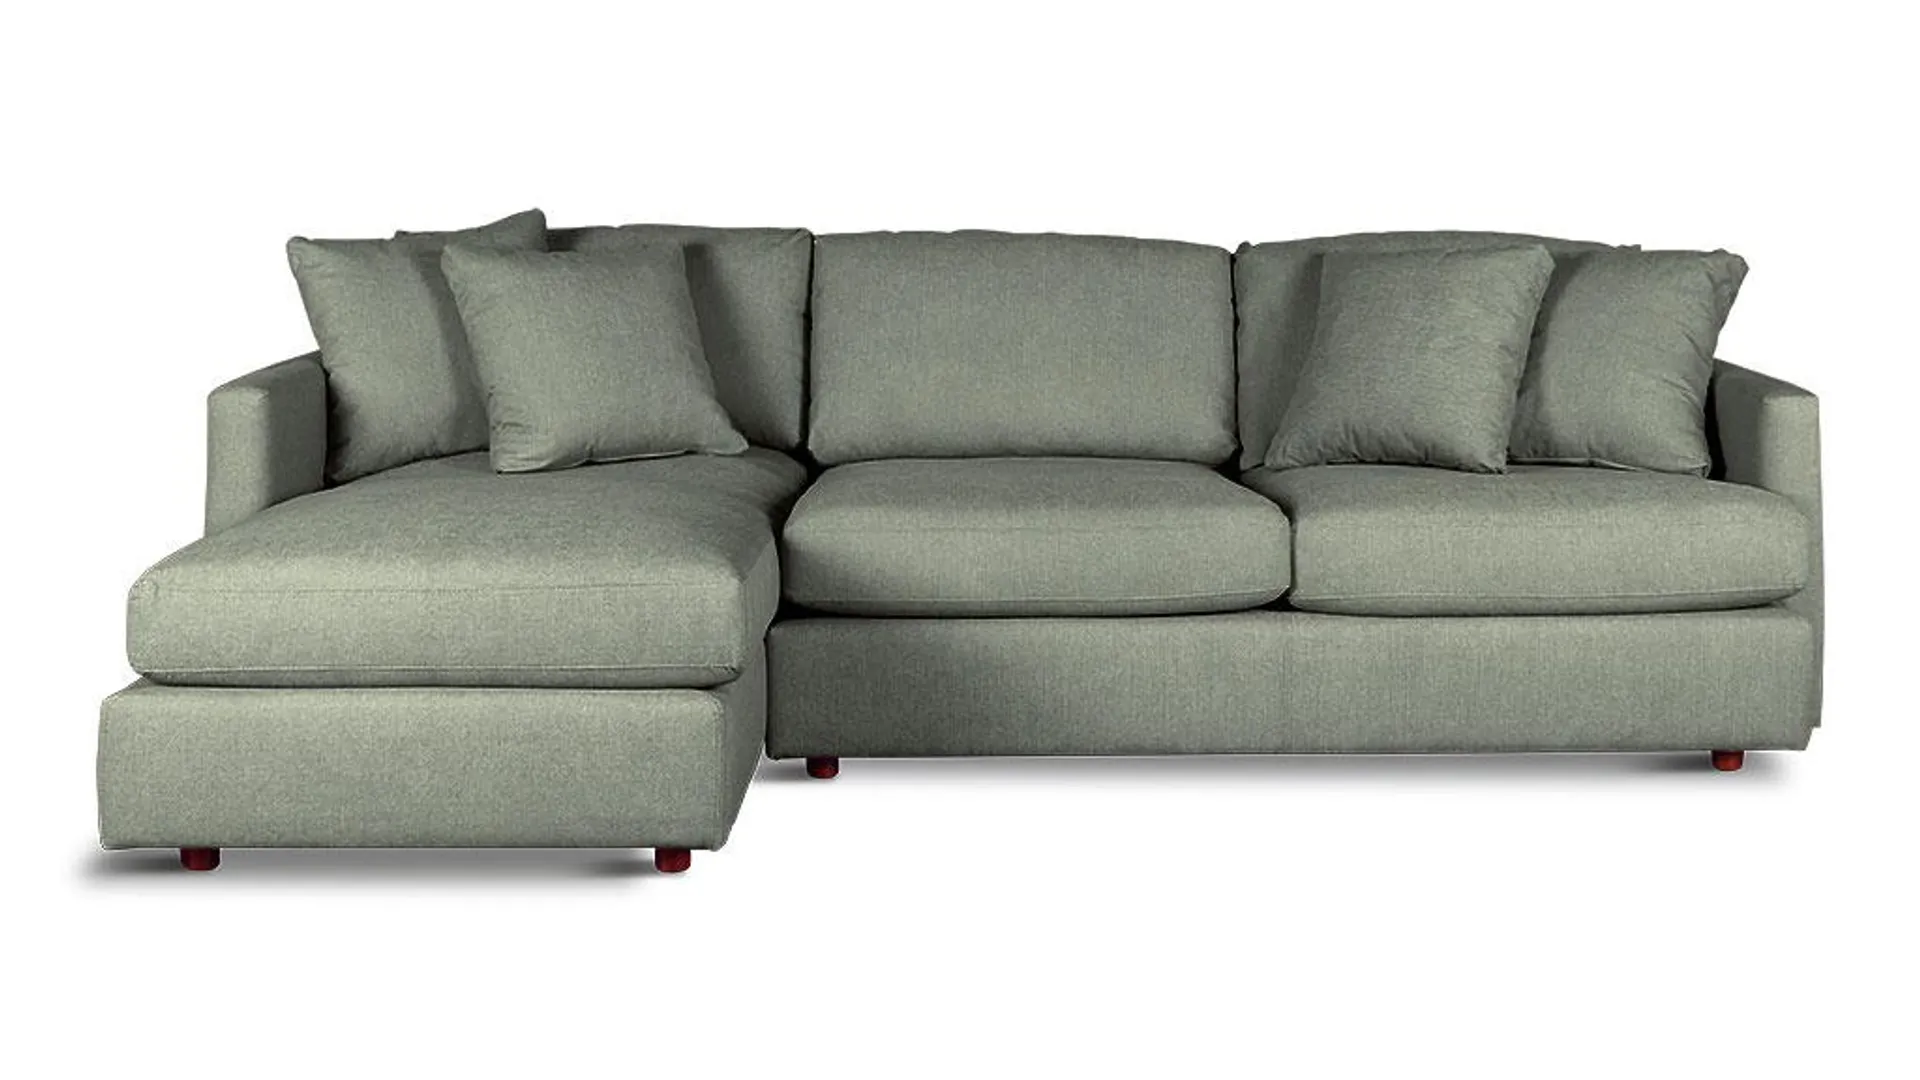 3 Seater LHF Chaise